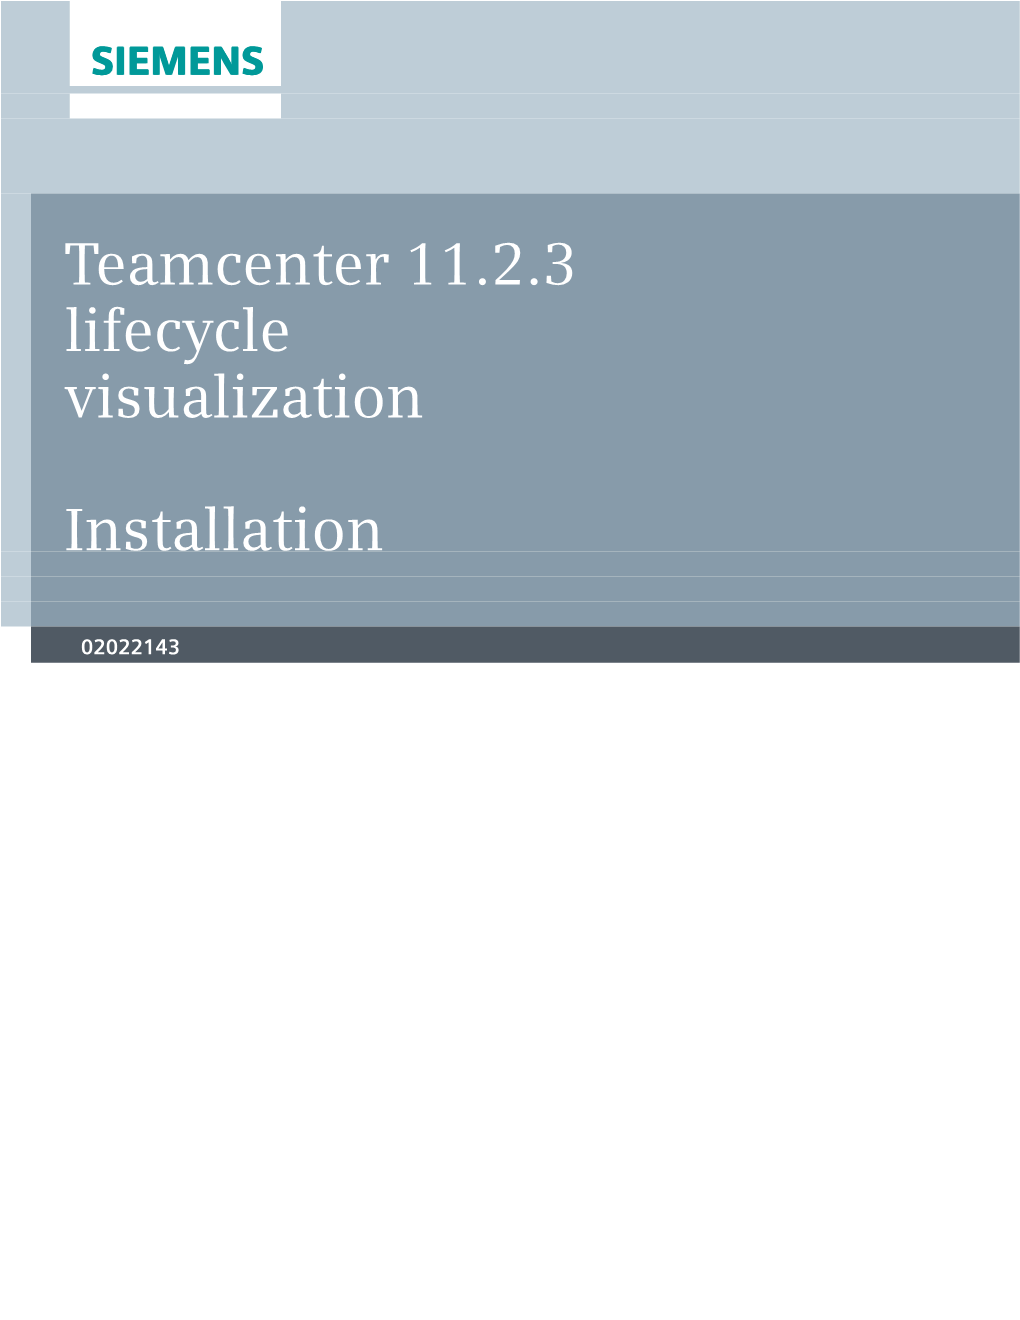 Teamcenter 11.2.3 Lifecycle Visualization Installation